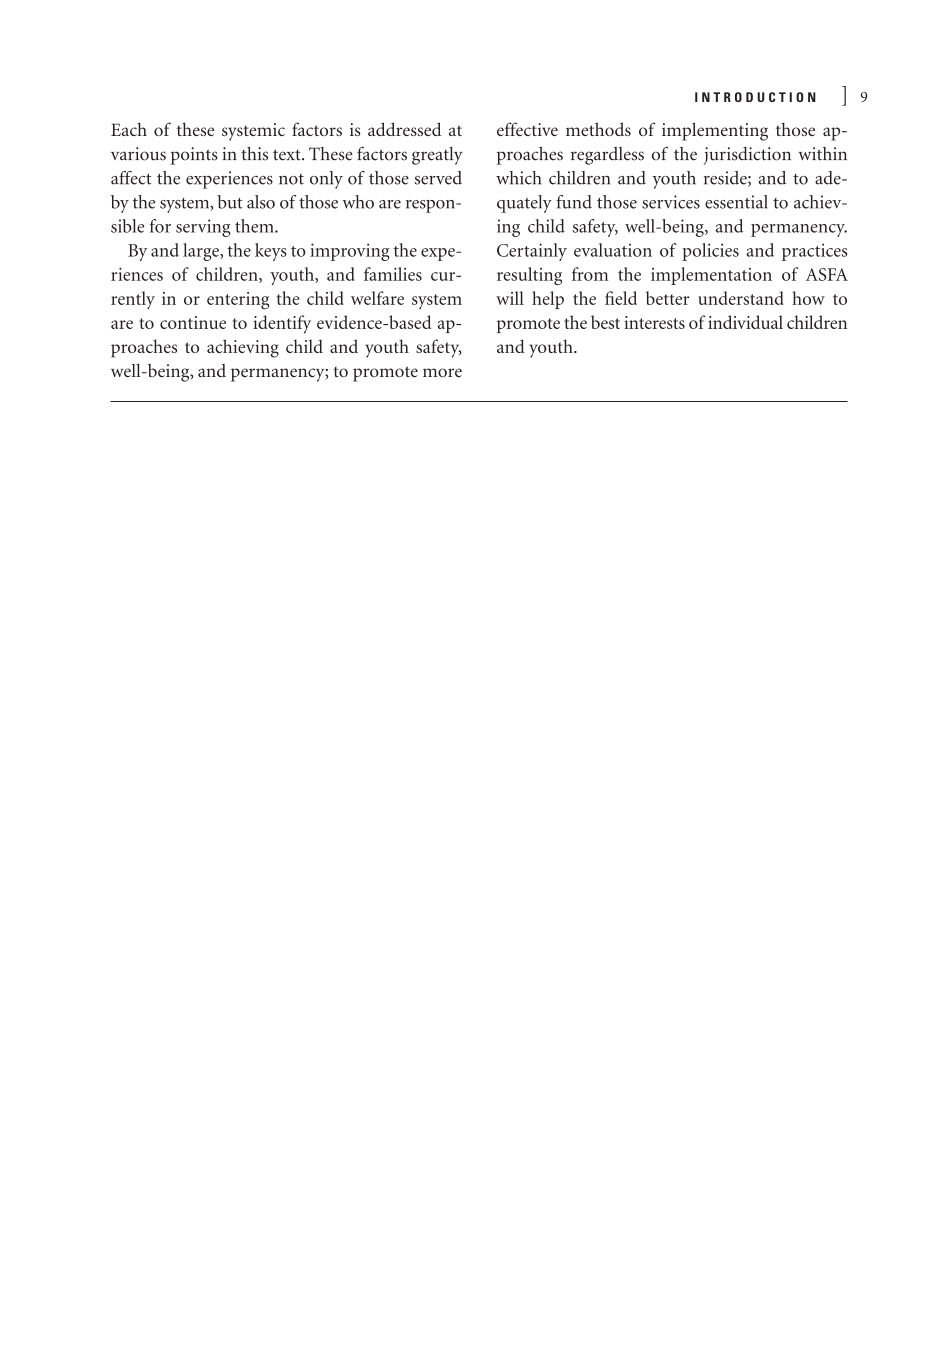 Child Welfare for the Twenty-first Century: A Handbook of Practices, Policies, and Programs page 9